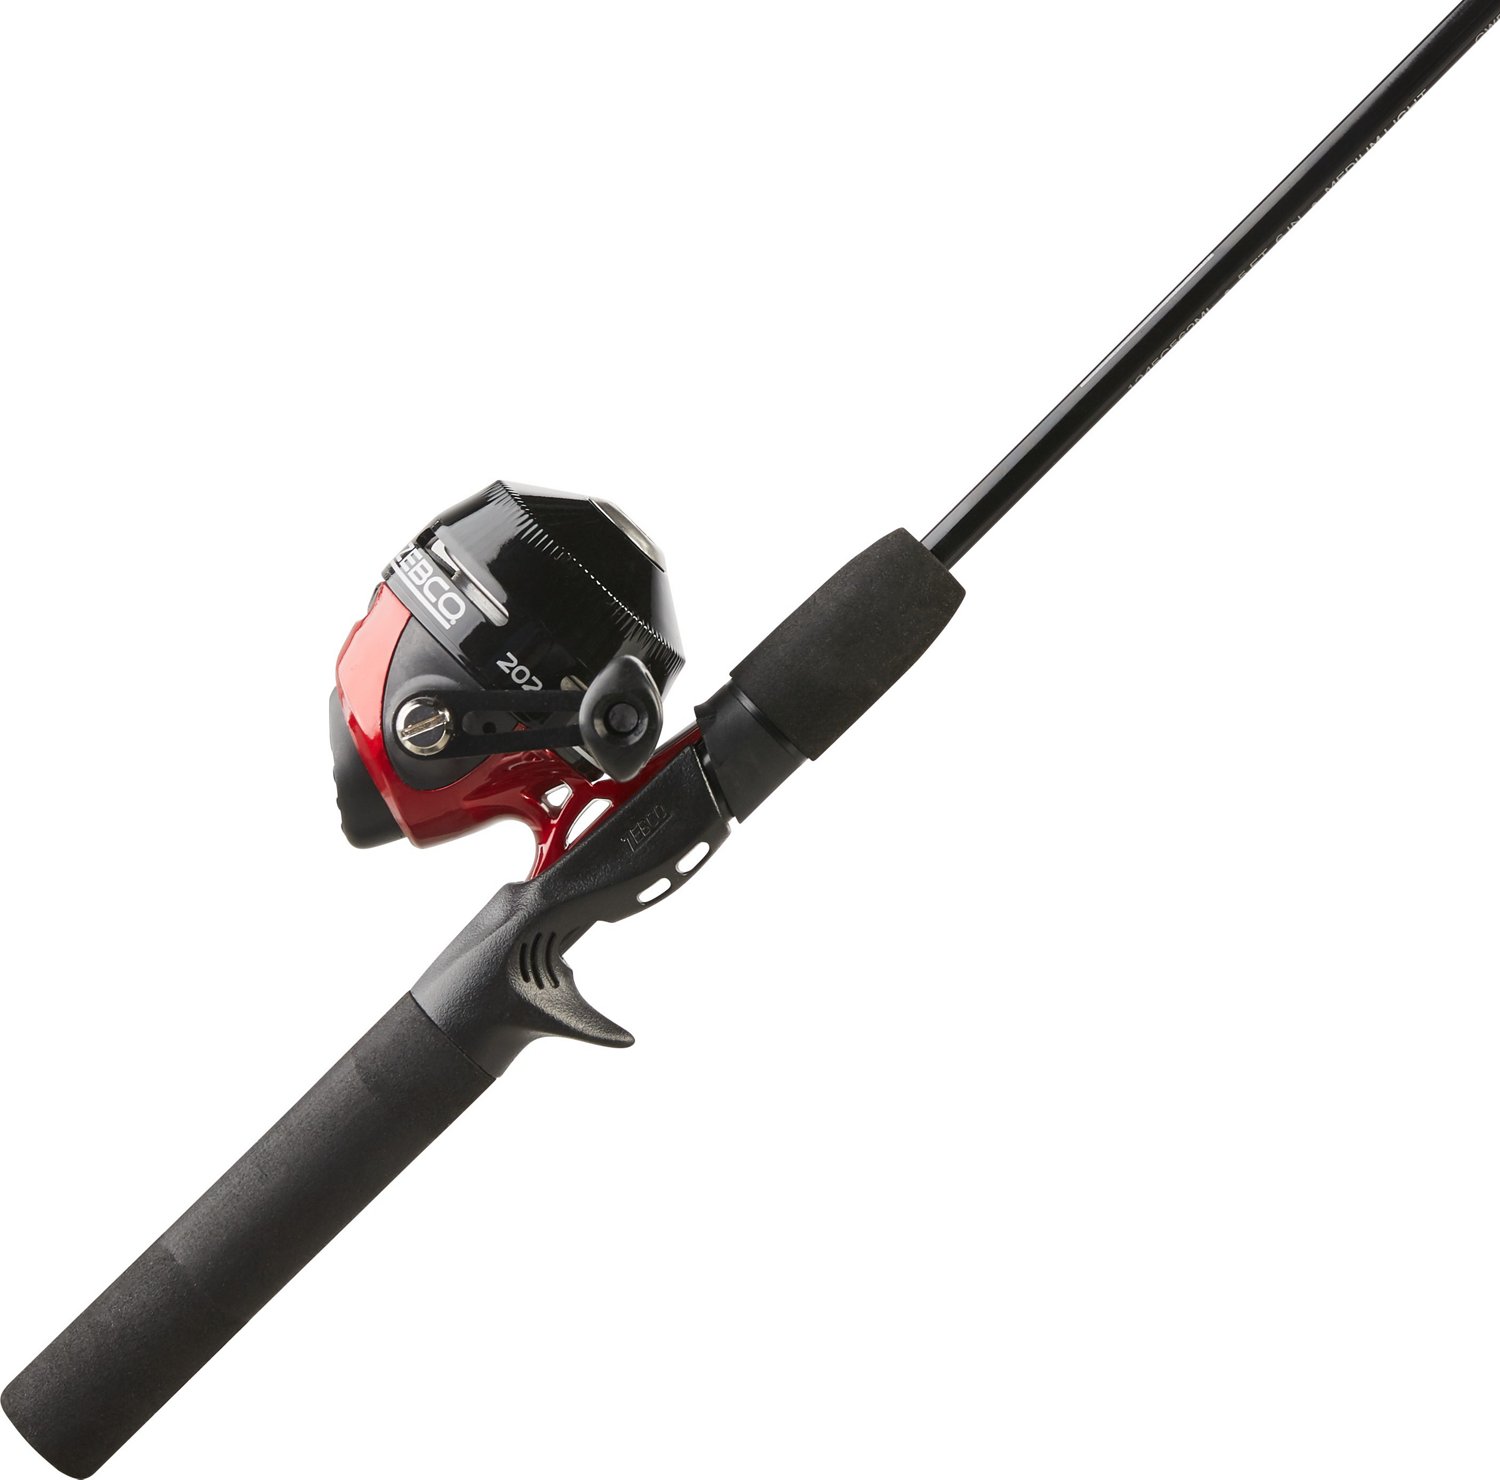 Zebco Spincast Combo 5 ft 6 in Item Fishing Rod & Reel Combos for